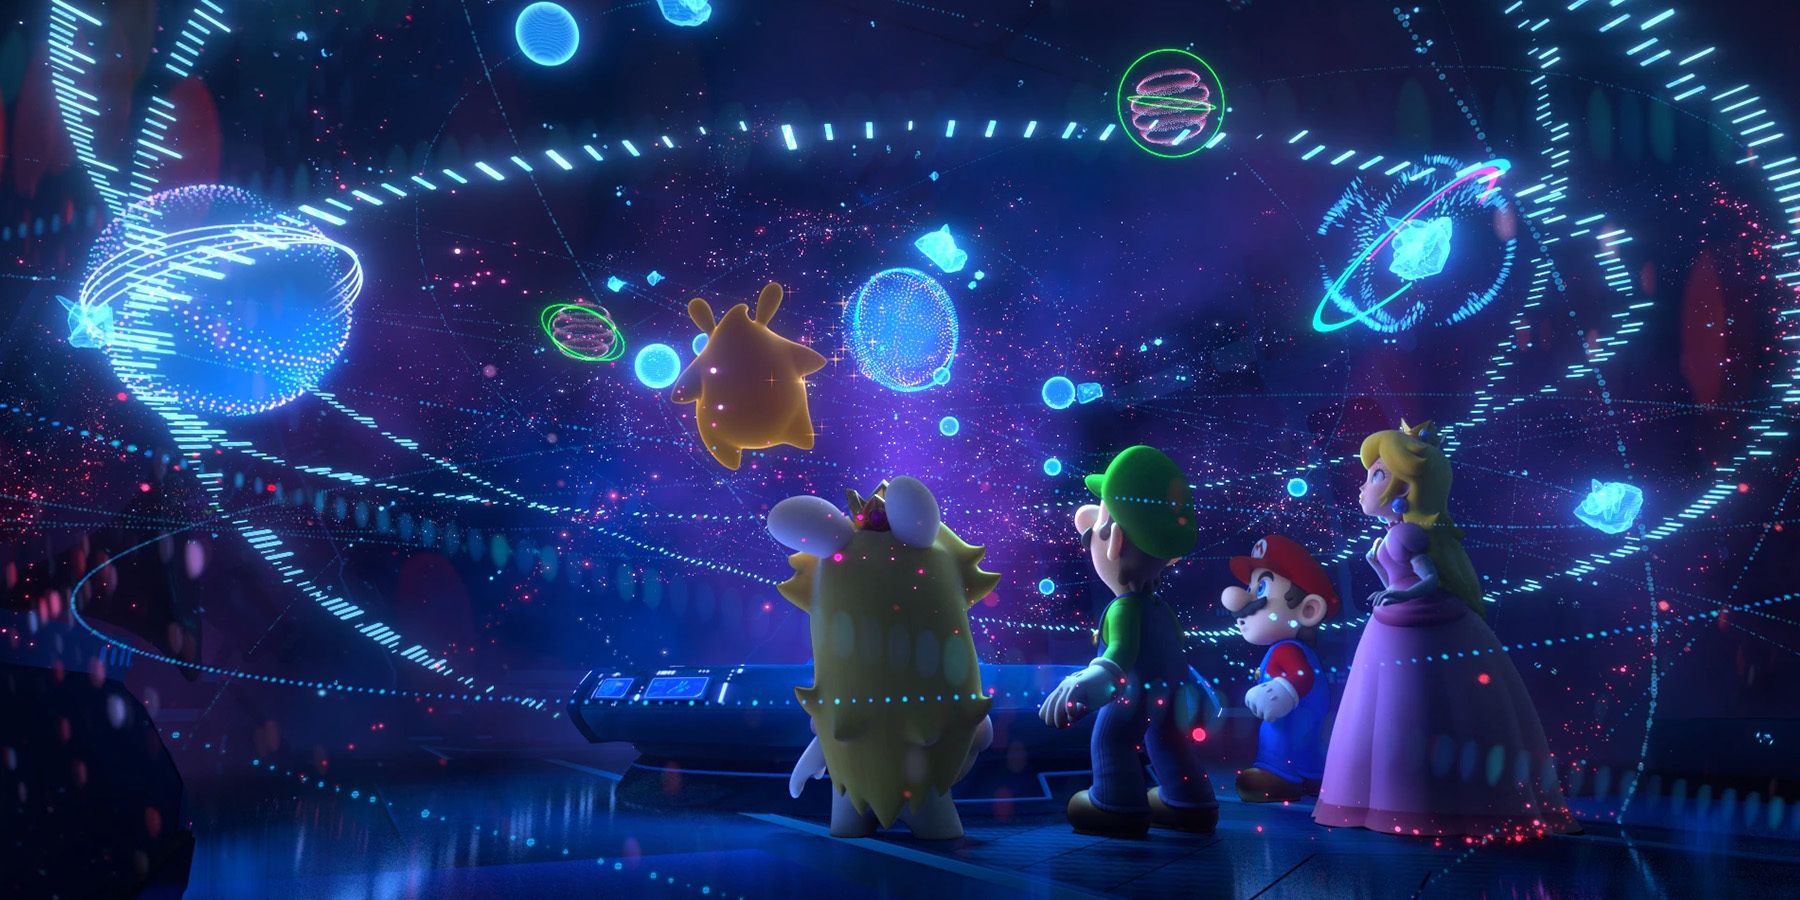 mario rabbids sparks of hope characters staring at projection of galaxy